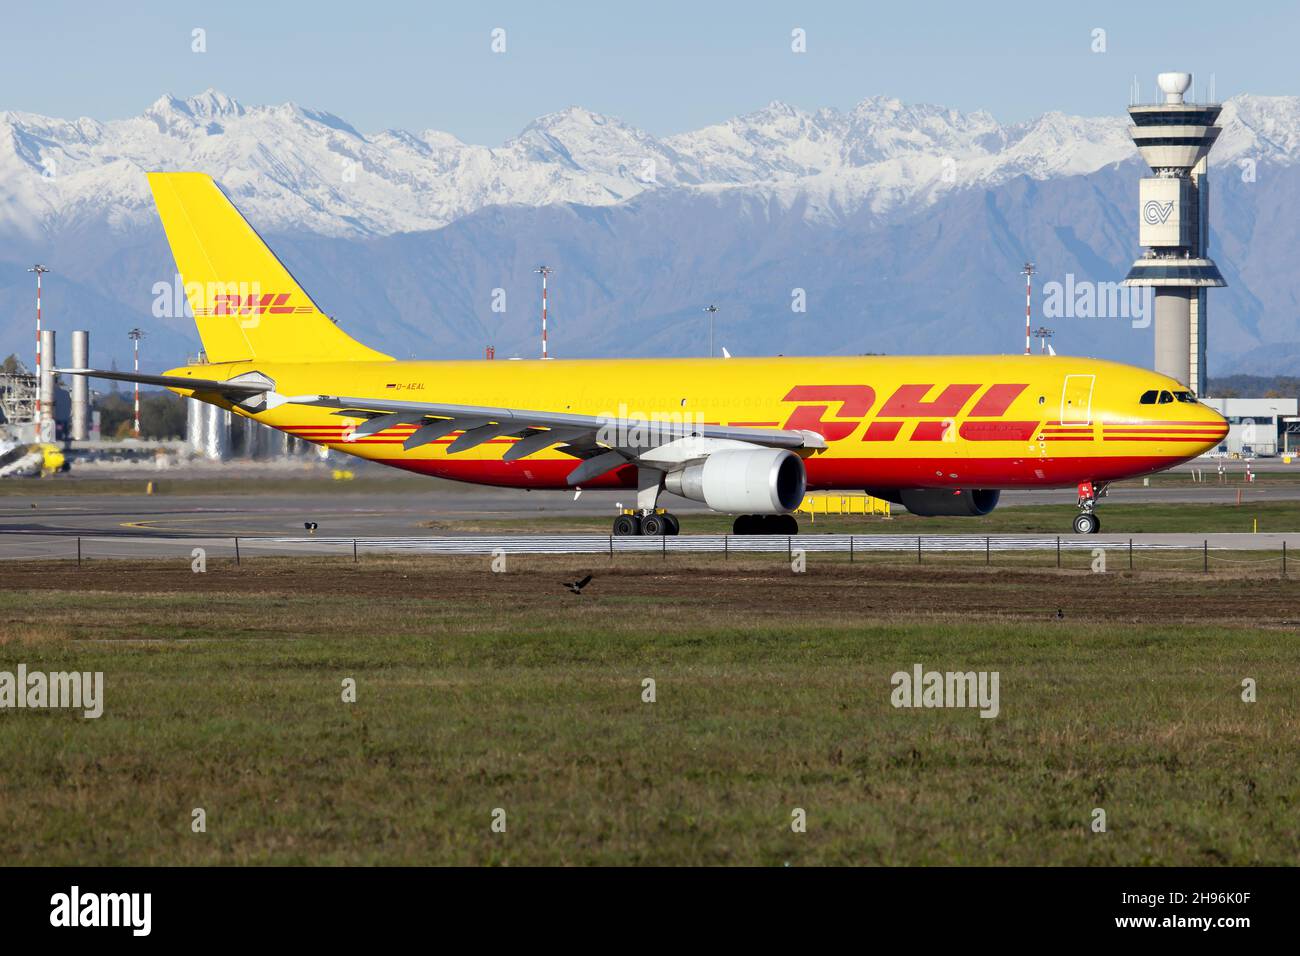 A DHL (European Air Transport) Airbus A300-600F lining up for departure from Milan Malpensa airport. Stock Photo